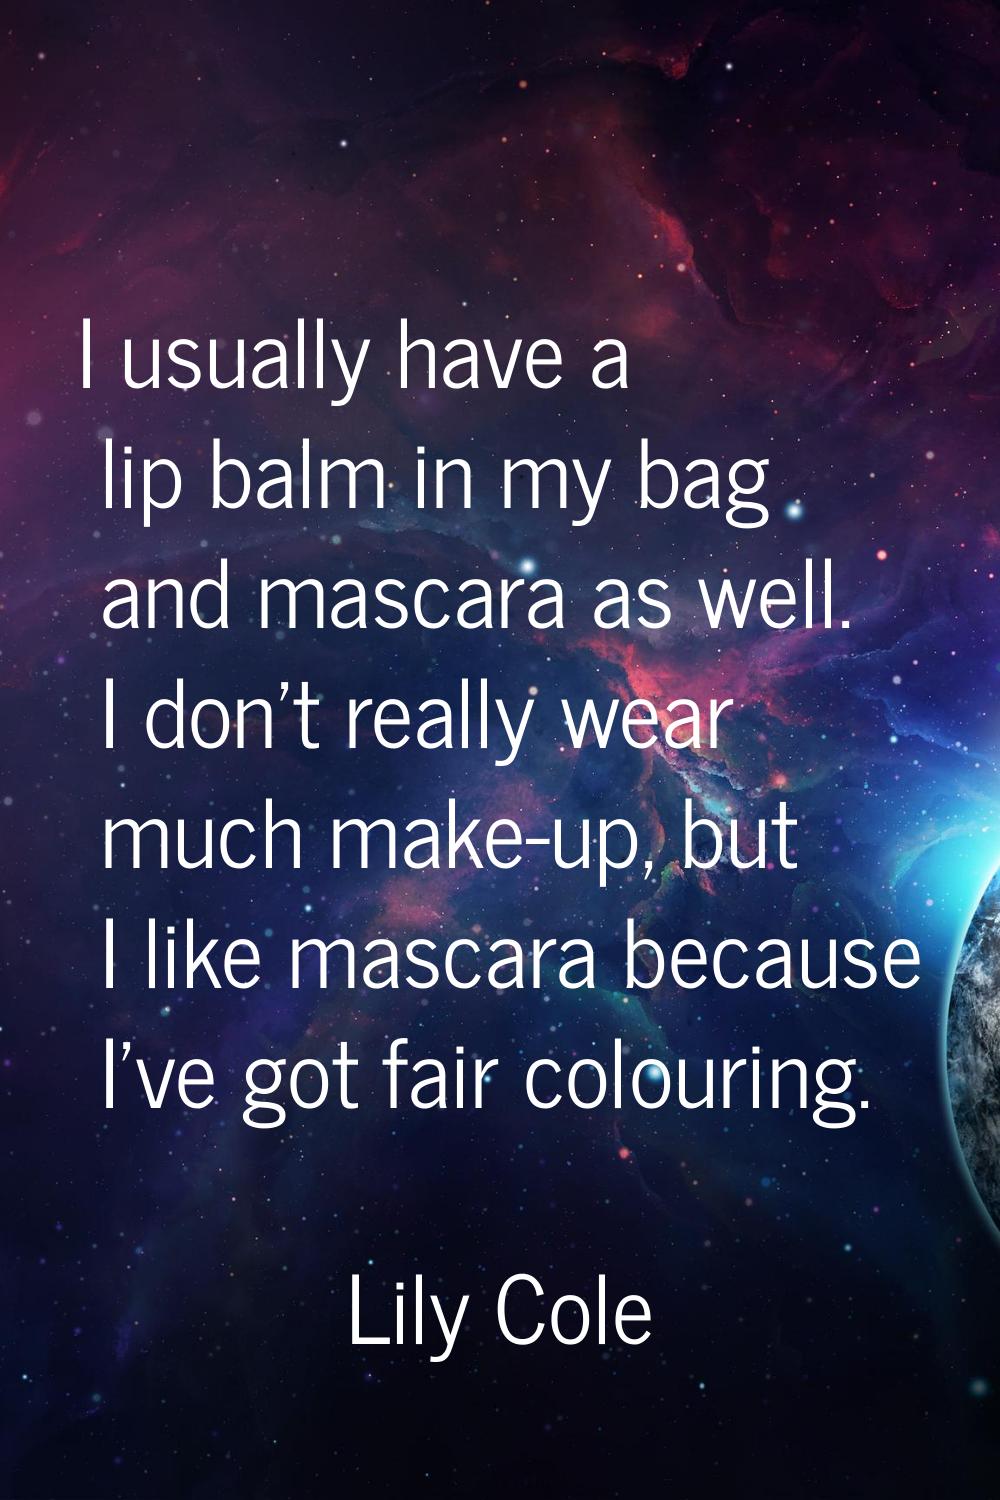 I usually have a lip balm in my bag and mascara as well. I don't really wear much make-up, but I li